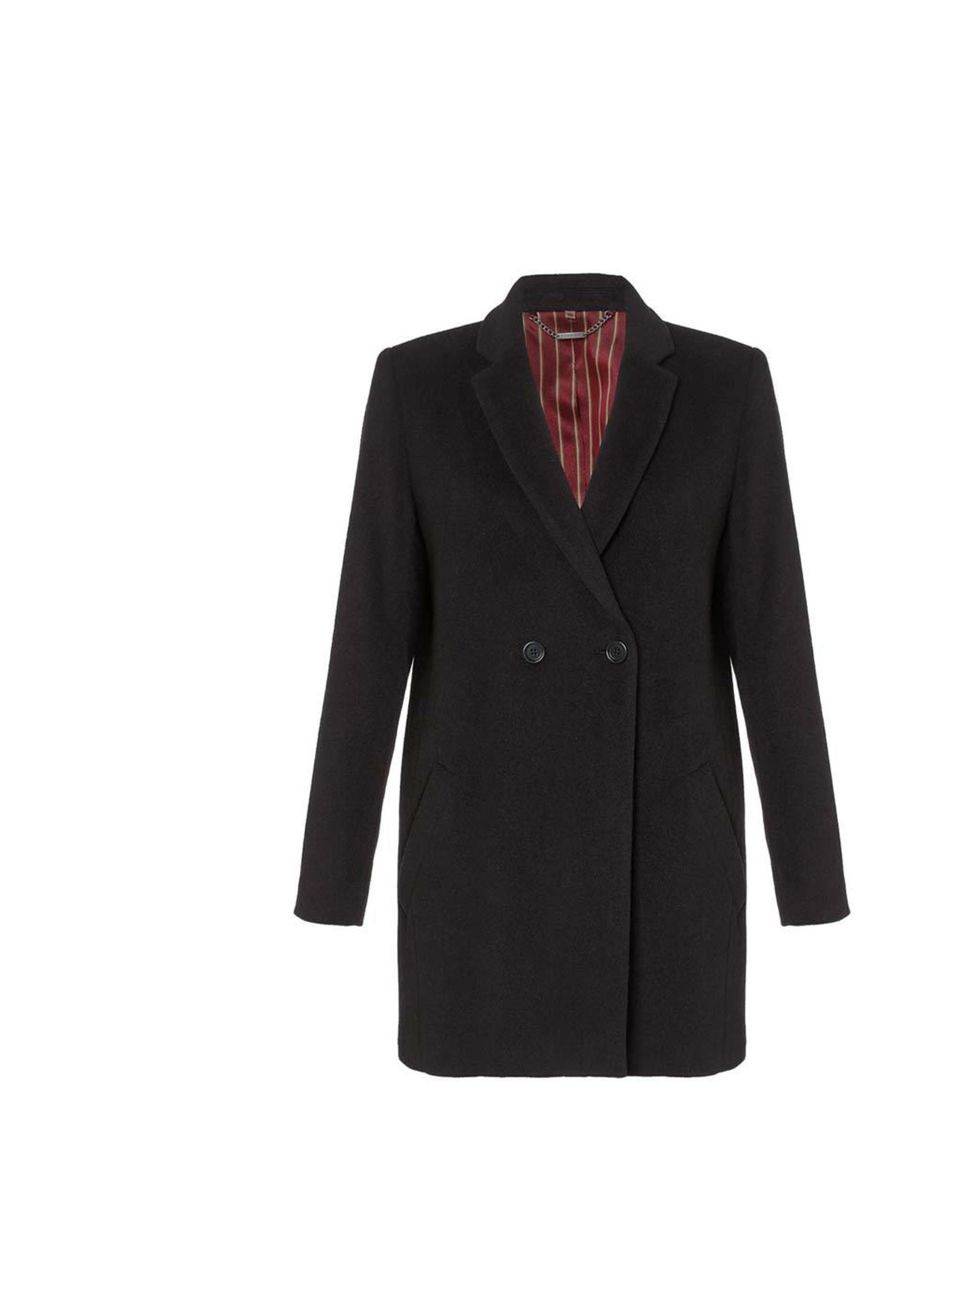 <p>We love the boxy cut of this mannish coat - keep the proportions in balance with neat tapered trousers or slim-fitting jeans, and a flash of ankle!</p><p><a href="http://www.jigsaw-online.com/products/luxe-double-breasted-coat-7810">Jigsaw</a> coat, £2